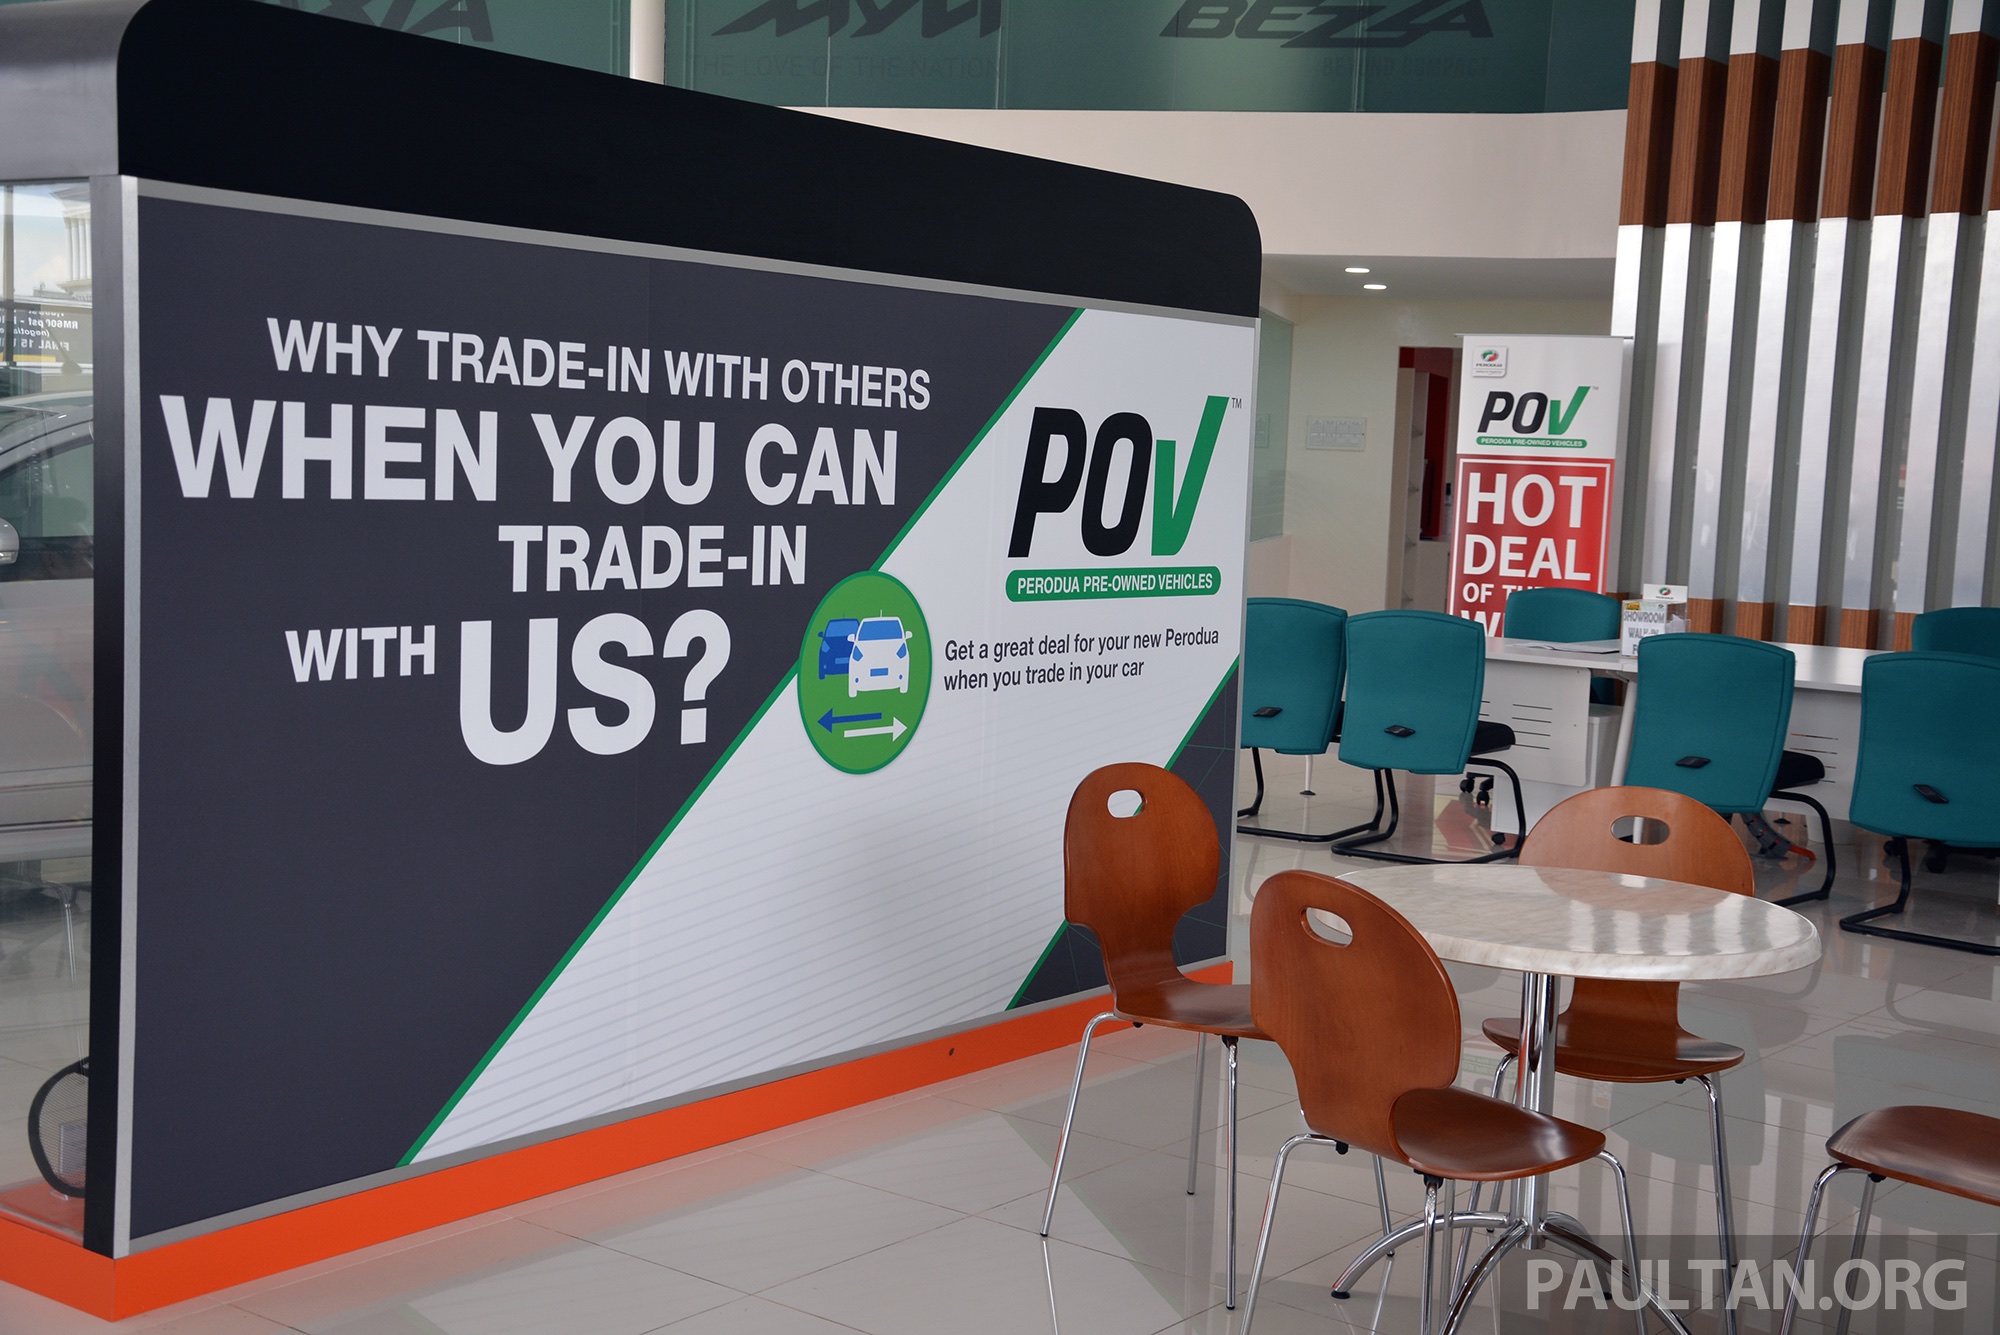 Perodua POV preowned vehicles retail business officially announced